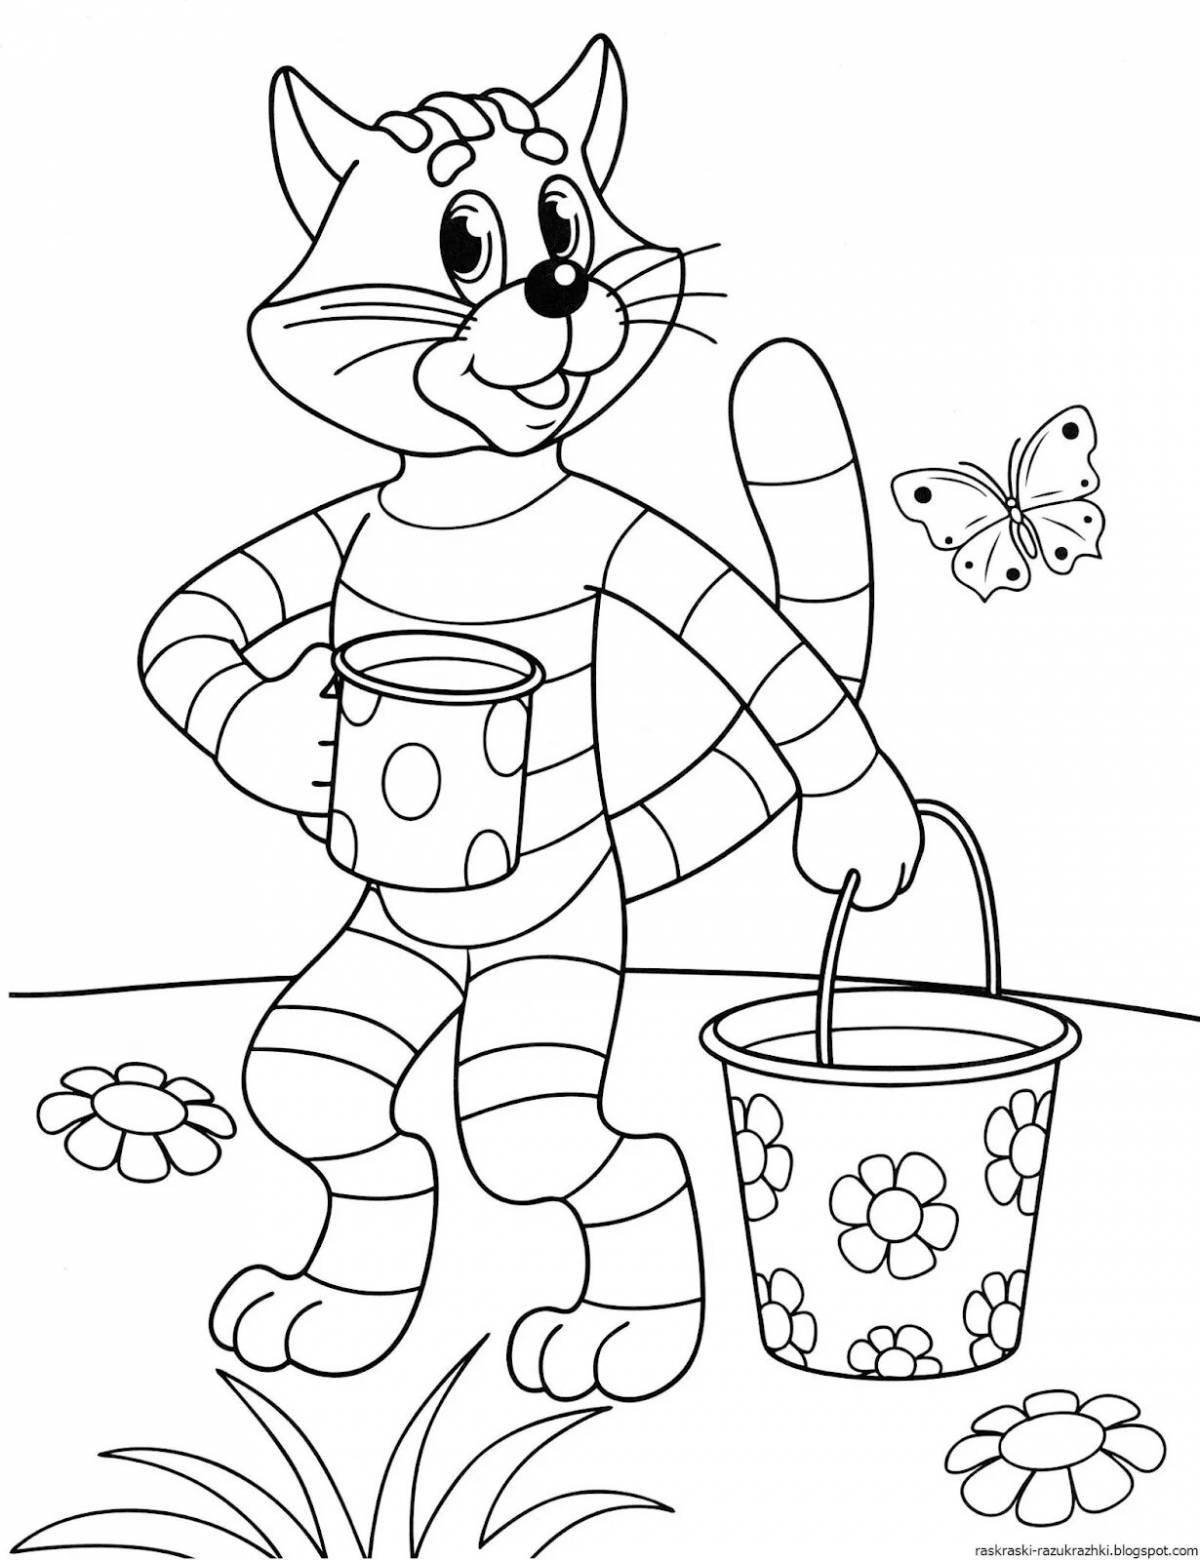 Colour-Crazy Buttermilk Coloring Pages for 5-6 year olds